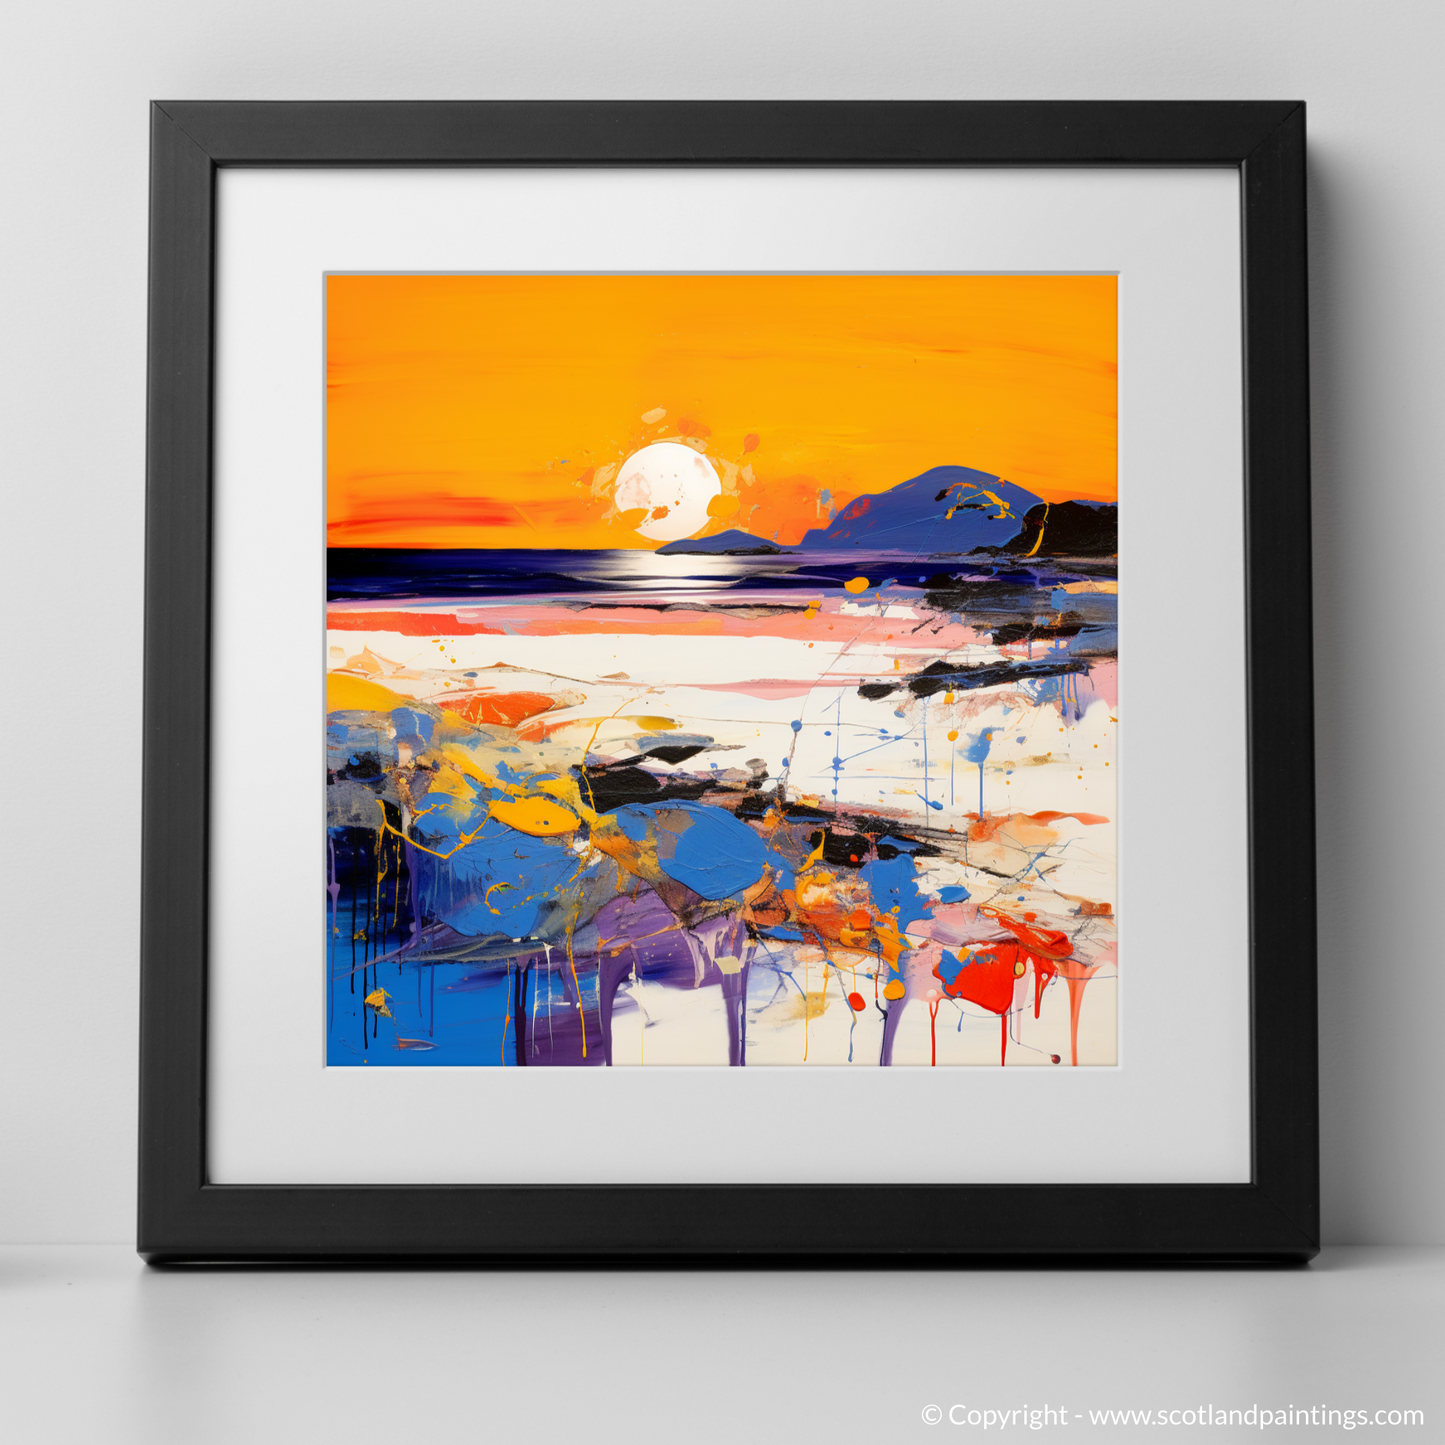 Arisaig Sunset Blaze: An Abstract Ode to Scottish Shores